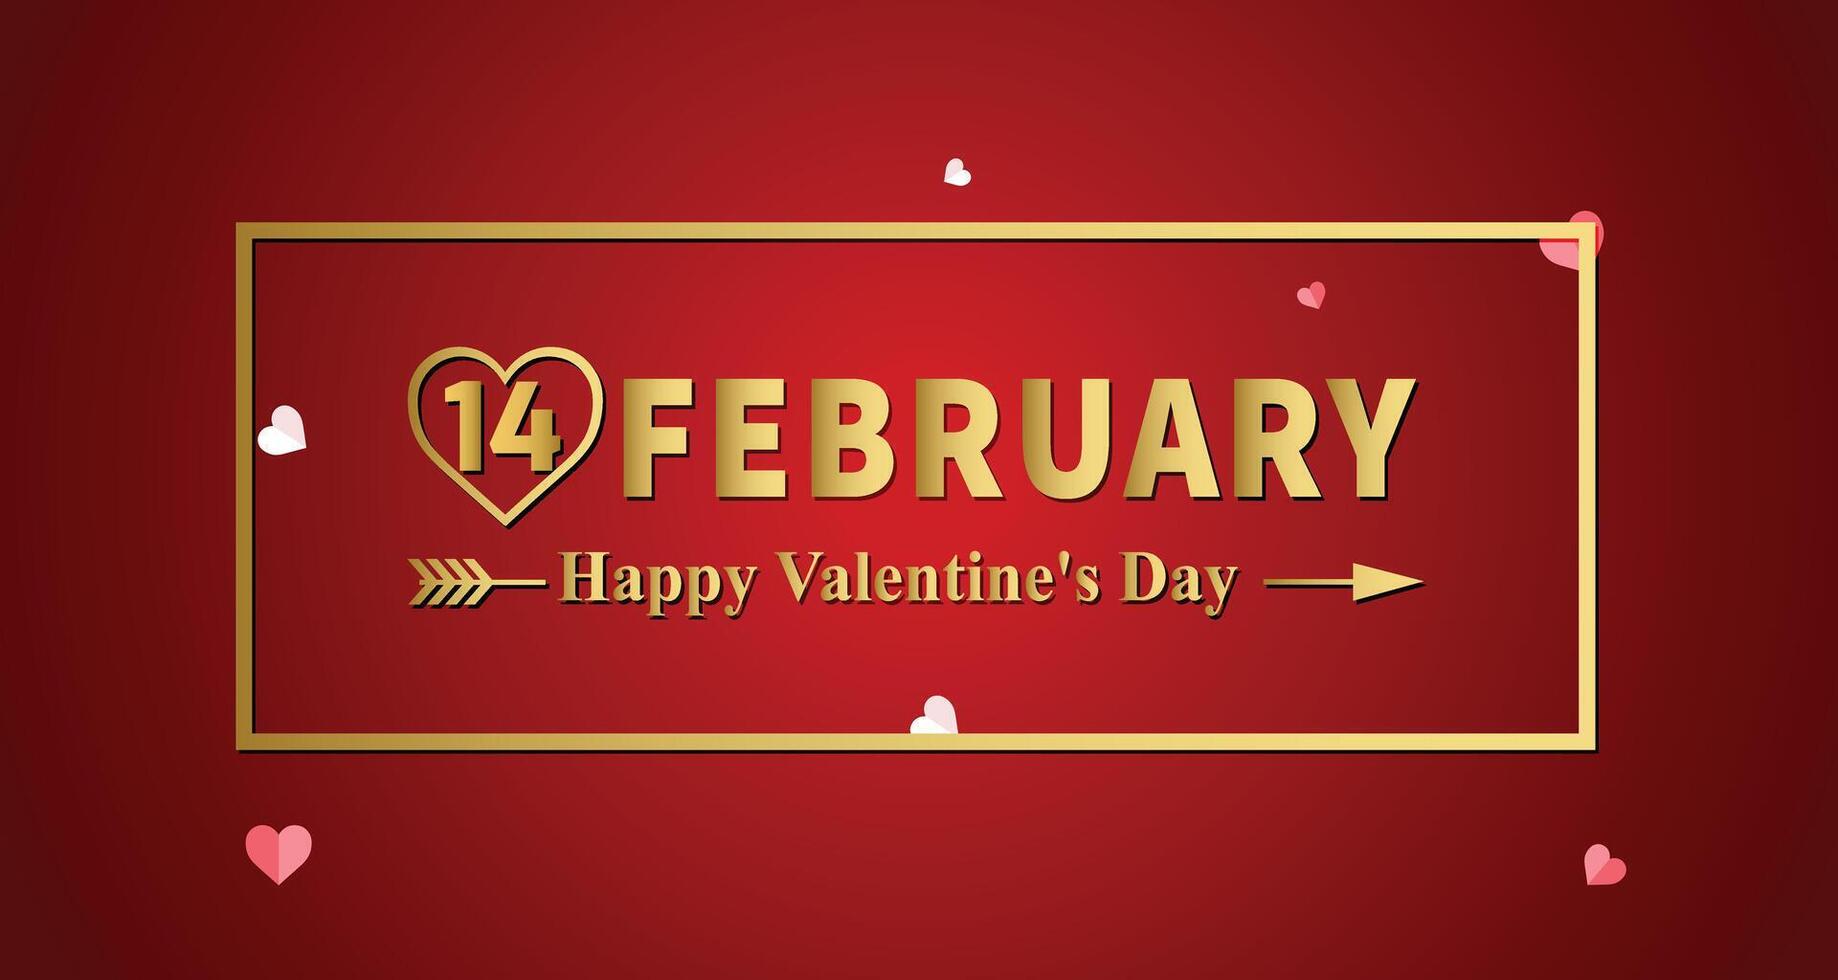 Valentines day background with typography of happy valentines day text vector